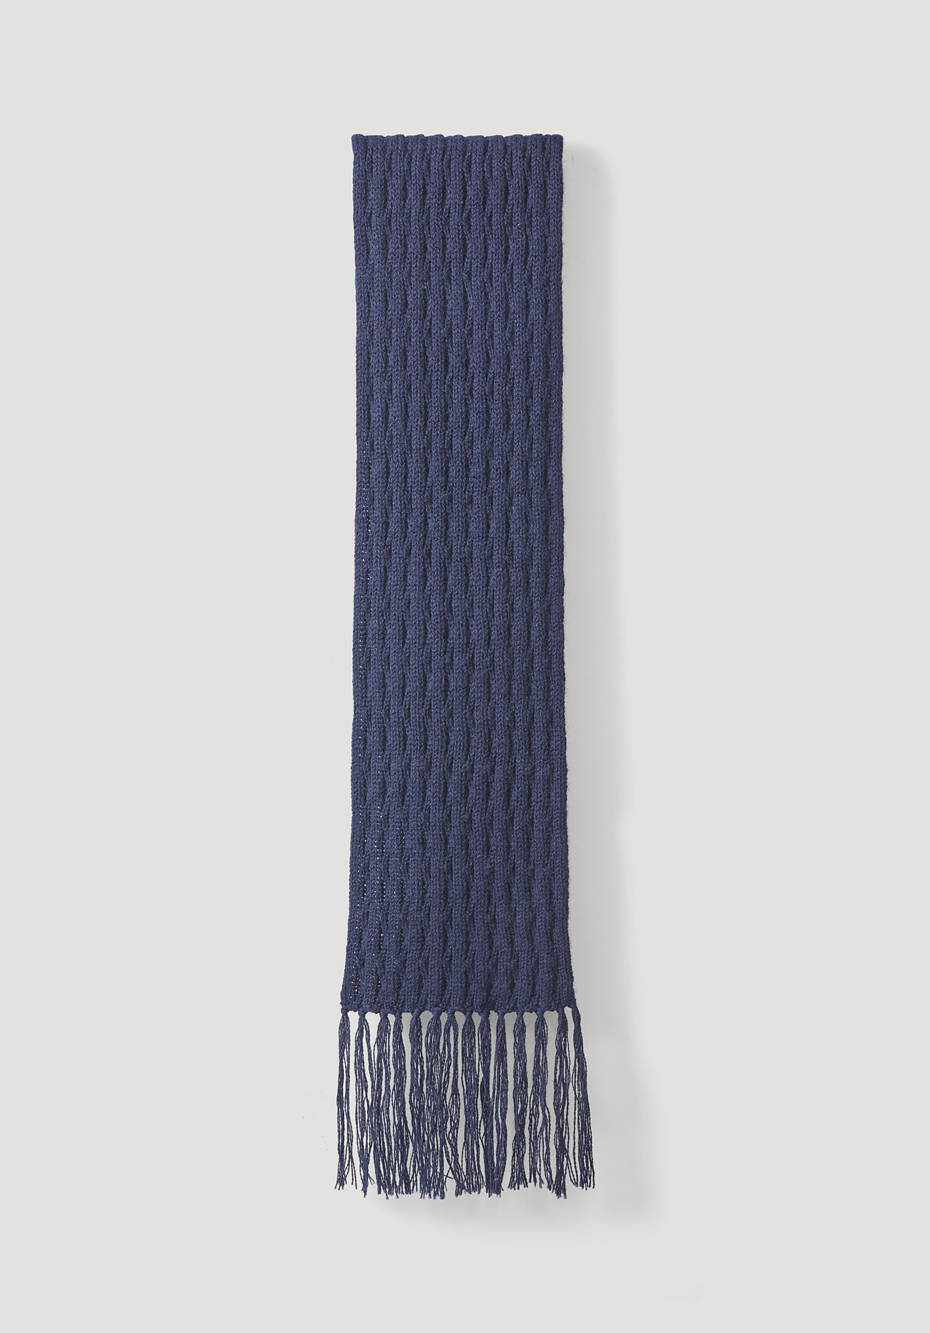 Cable scarf made from Mongolian merino wool